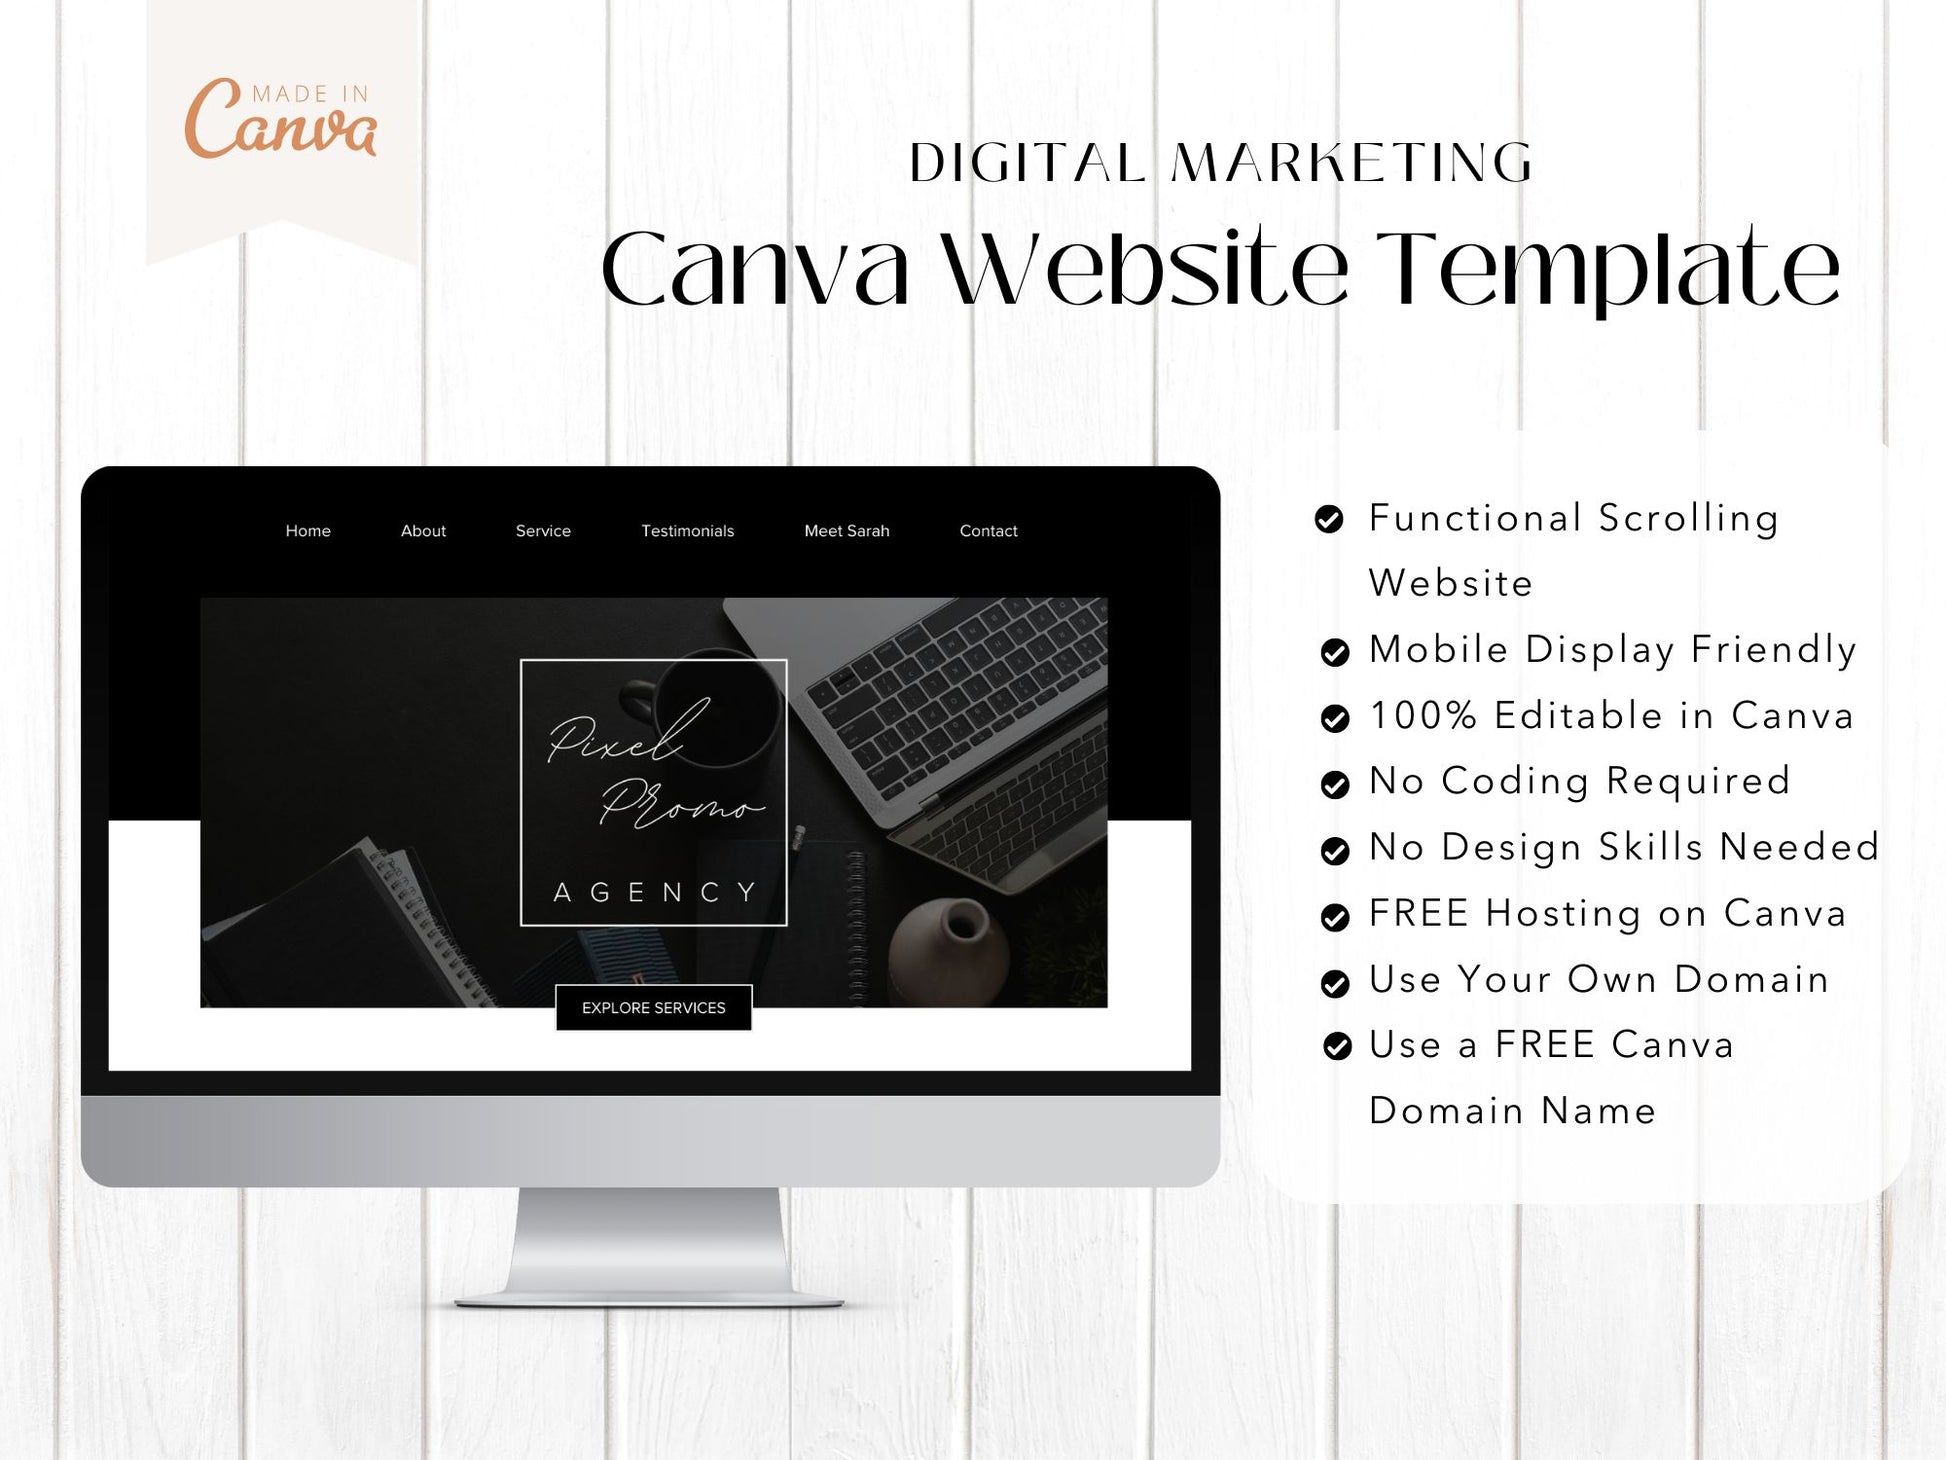 Social Media Marketing Agency Canva Site - Powerful and customizable online platform for social media marketing professionals.